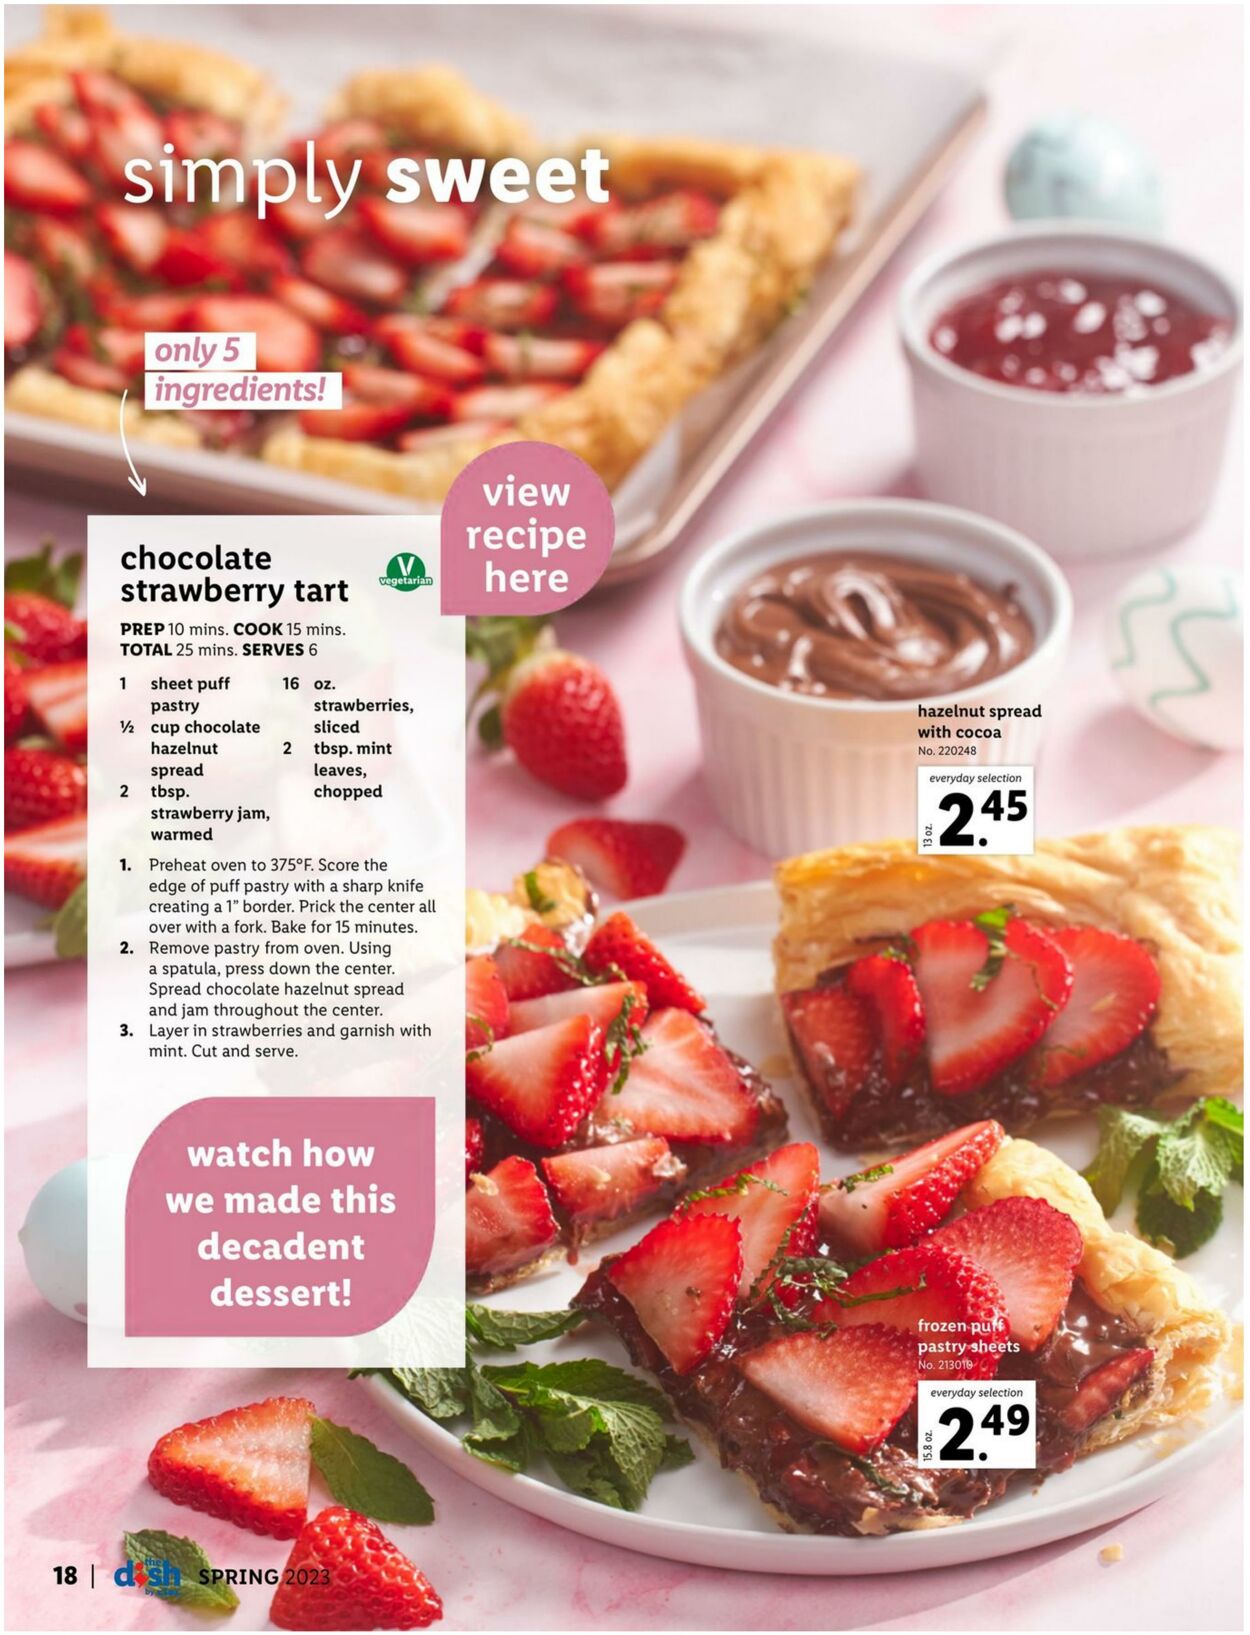 Weekly ad Lidl 03/01/2023 - 04/25/2023